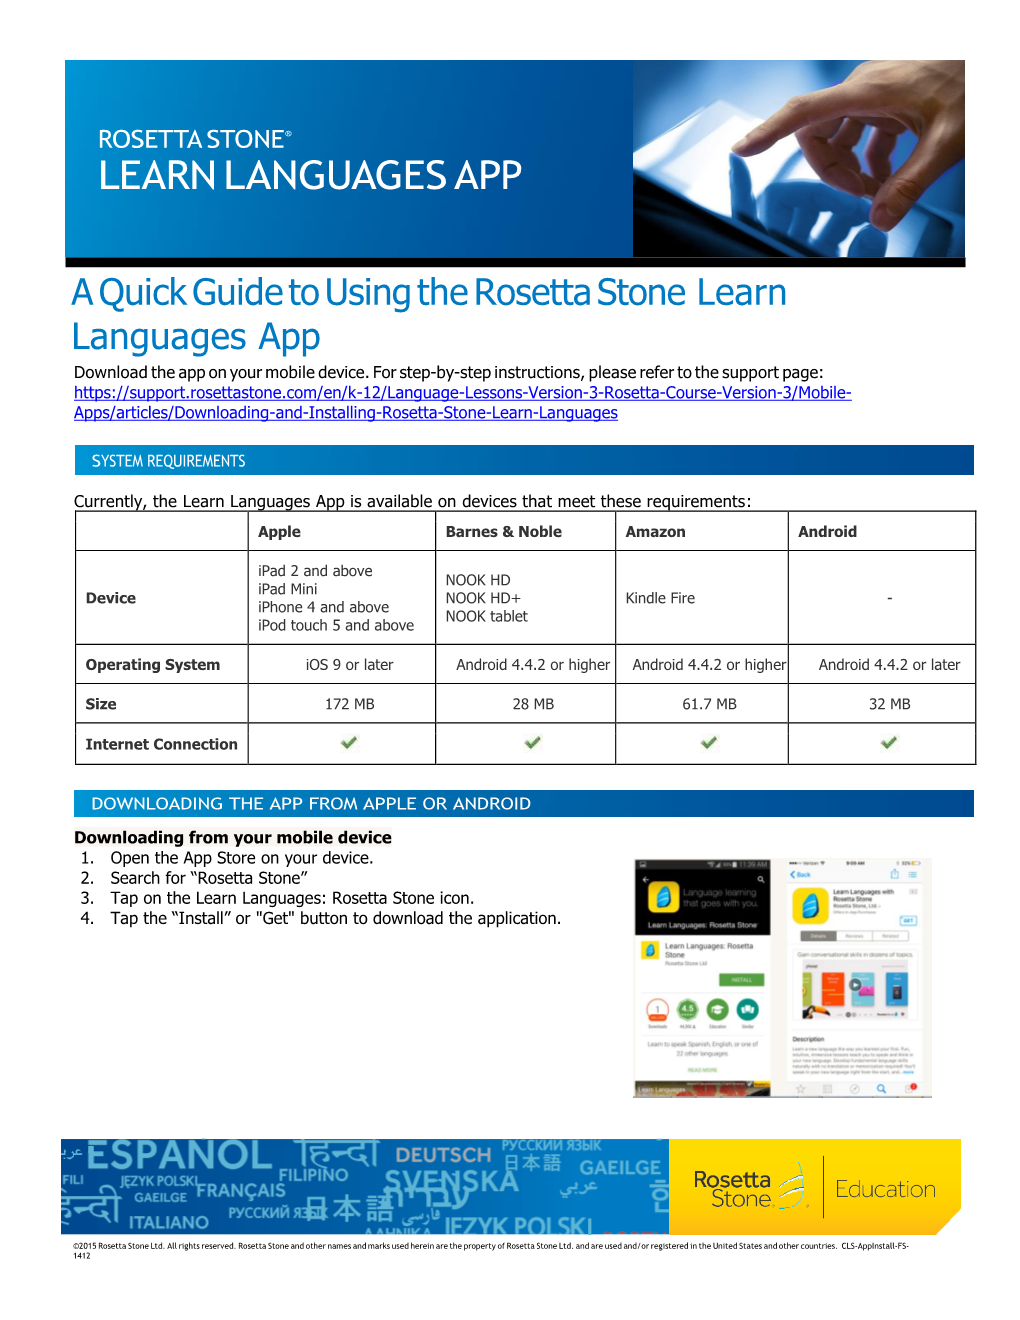 A Quick Guide to Using the Rosetta Stone Learn Languages App Download the App on Your Mobile Device